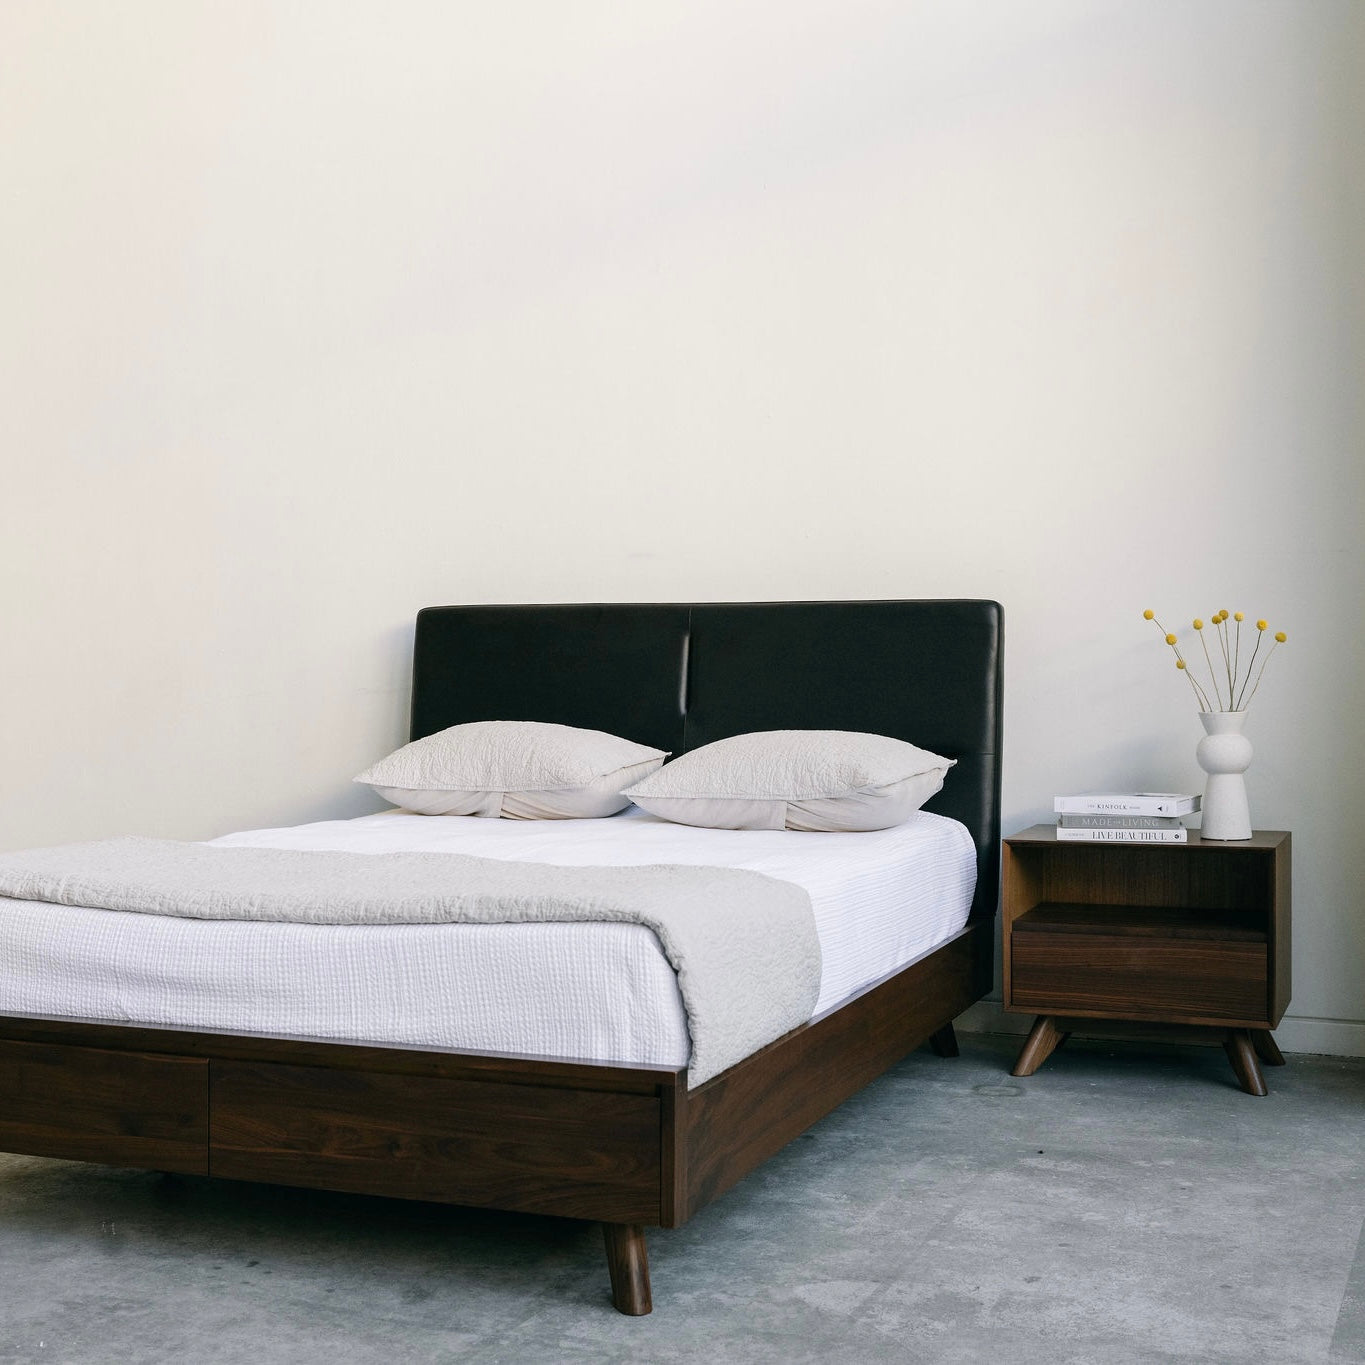 Mim Concept  best Modern furniture stores in Toronto, Ottawa and Mississauga to sell modern contemporary bedroom furniture and condo furniture. Italian leather headboard bed Low profile platform storage bed solid walnut wood